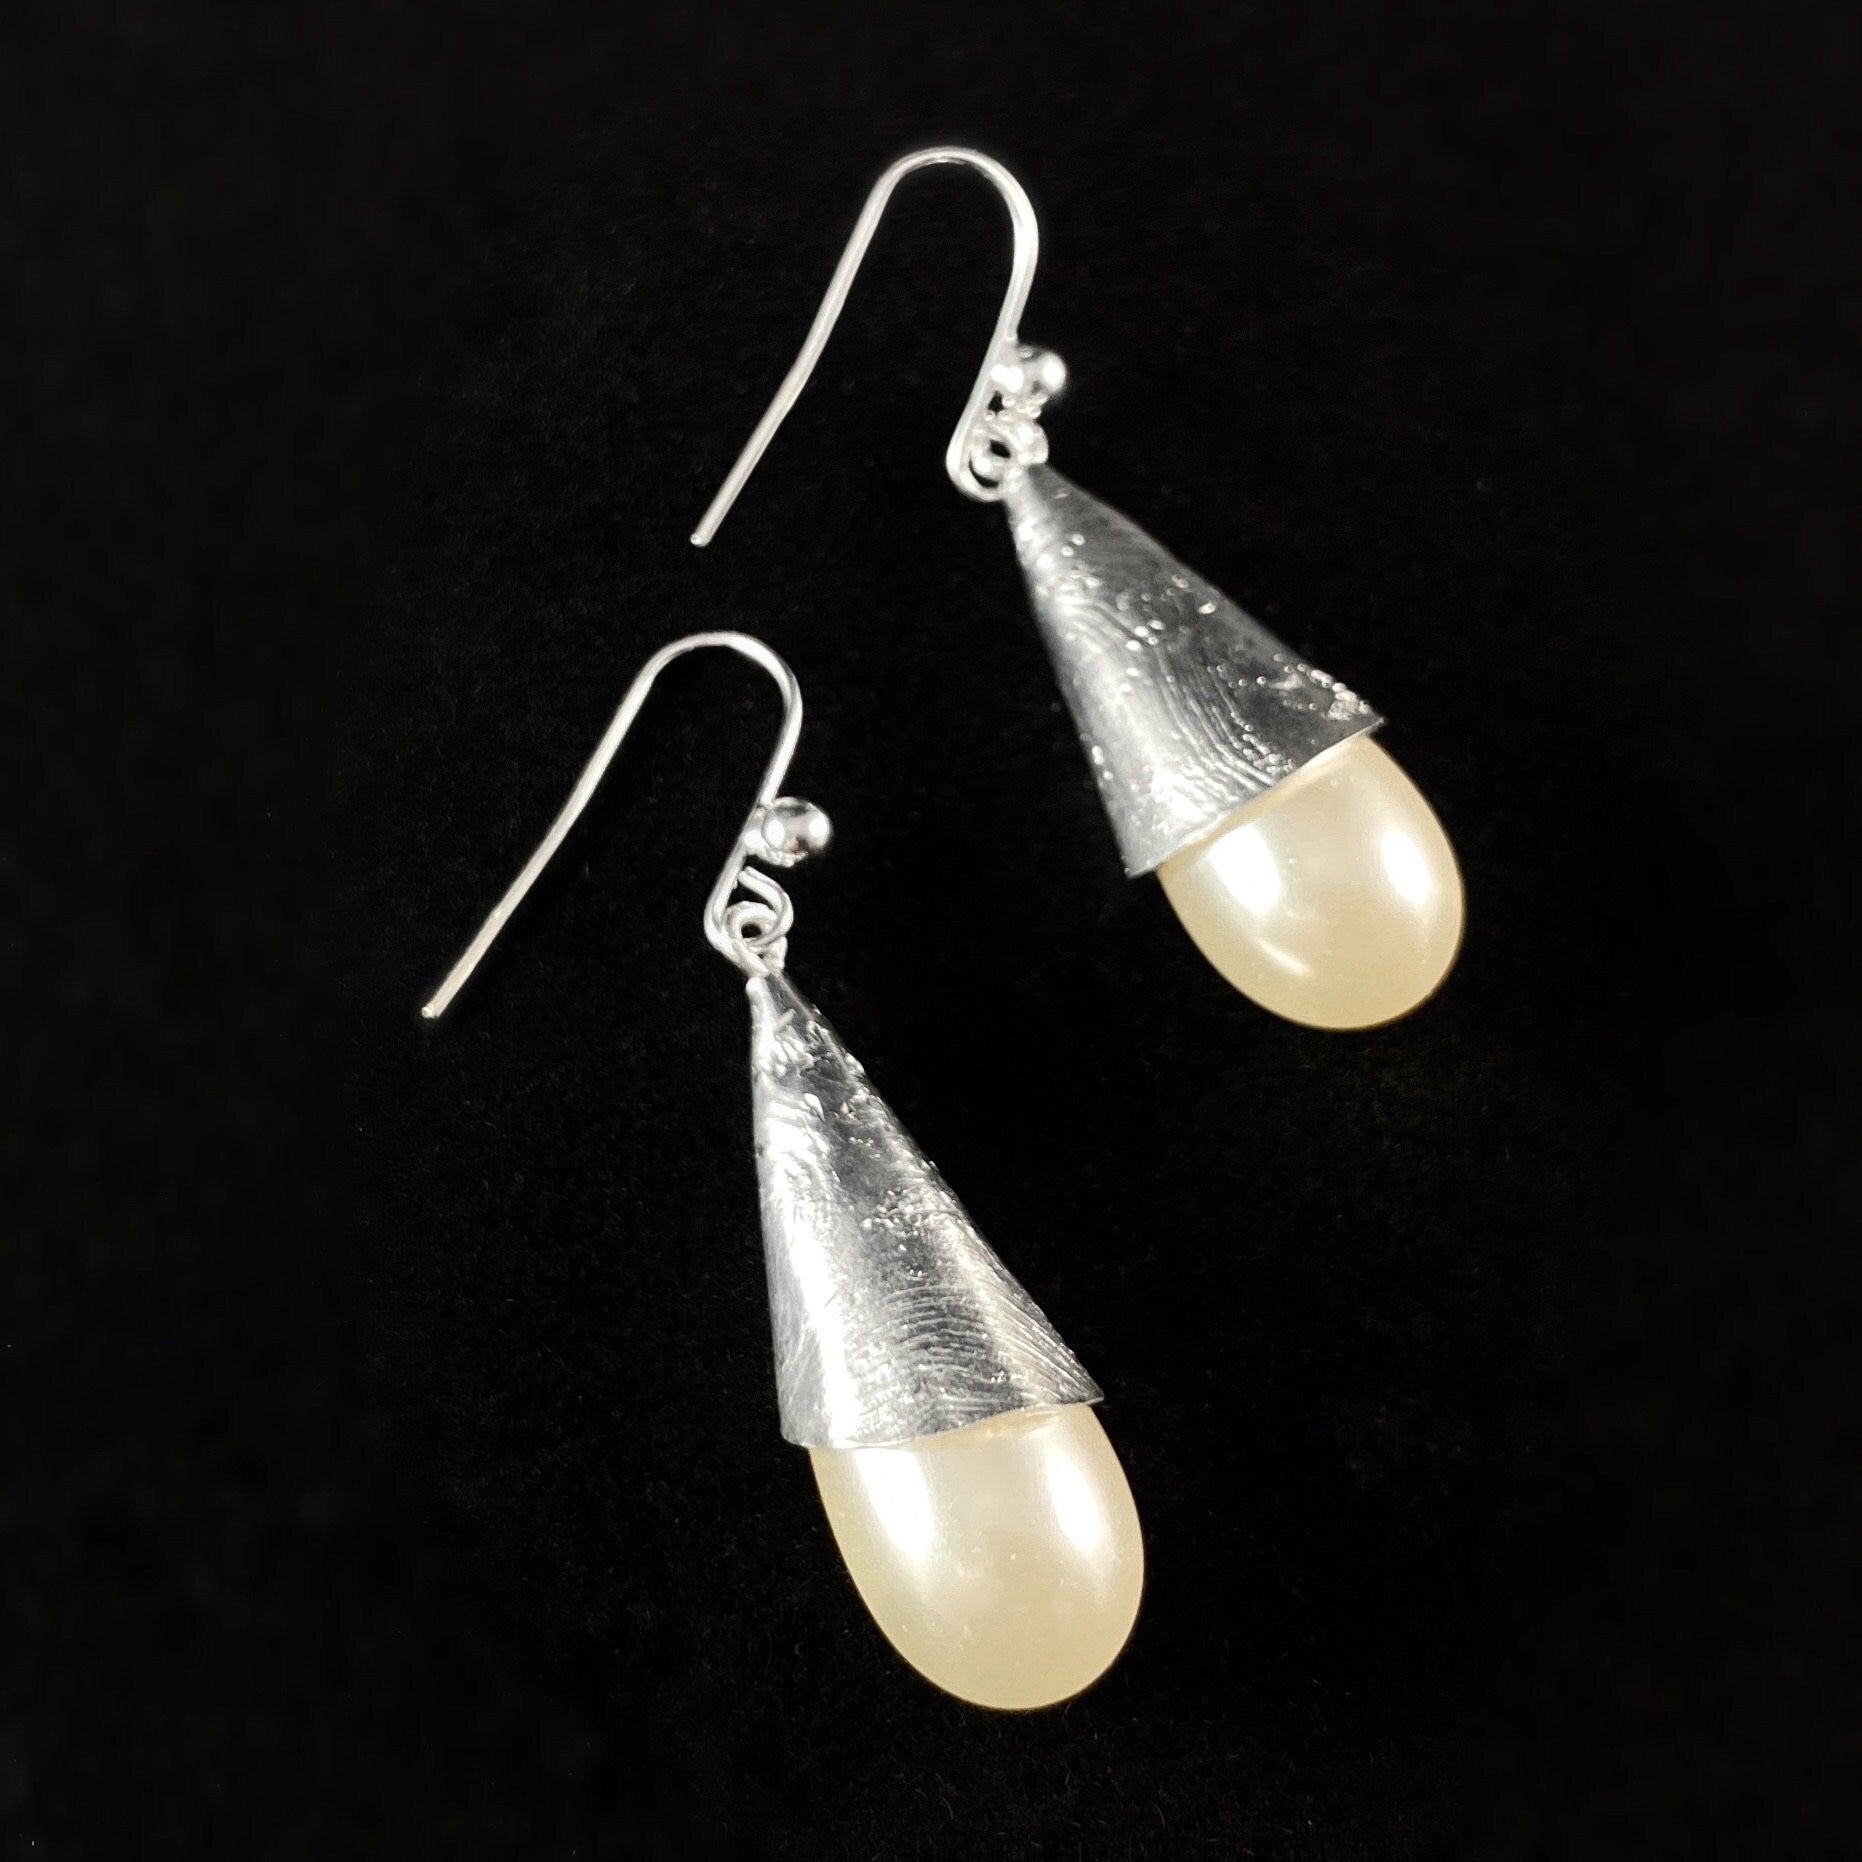 Dainty Minimalist Cream-colored Pearl Earrings with Silver Cone Detailing - Handmade Nickel Free Ulla Jewelry